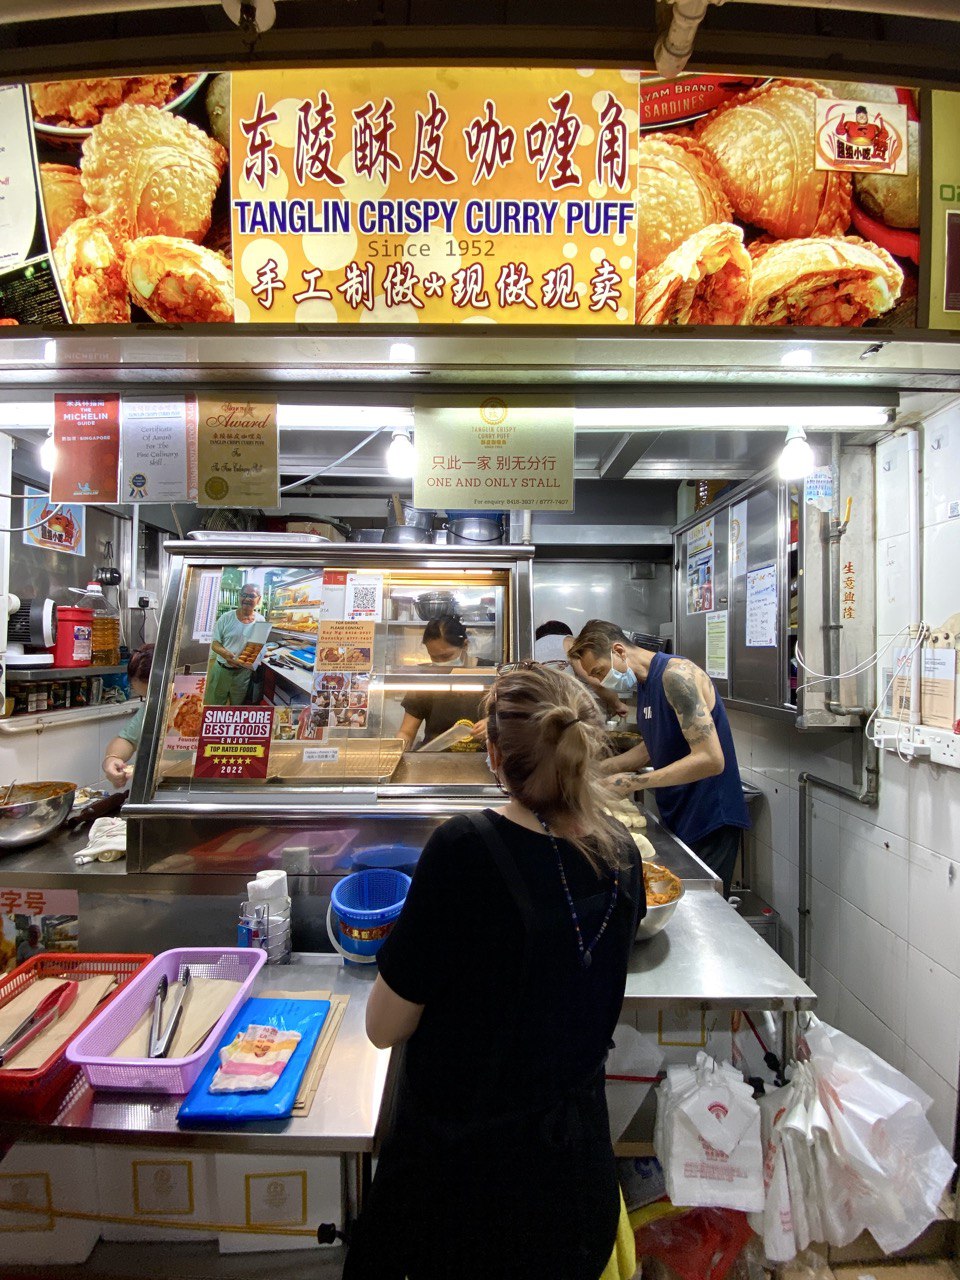 Tanglin Crispy Curry Puff’s Similar-Named Rival Stall Is Also Opening ...